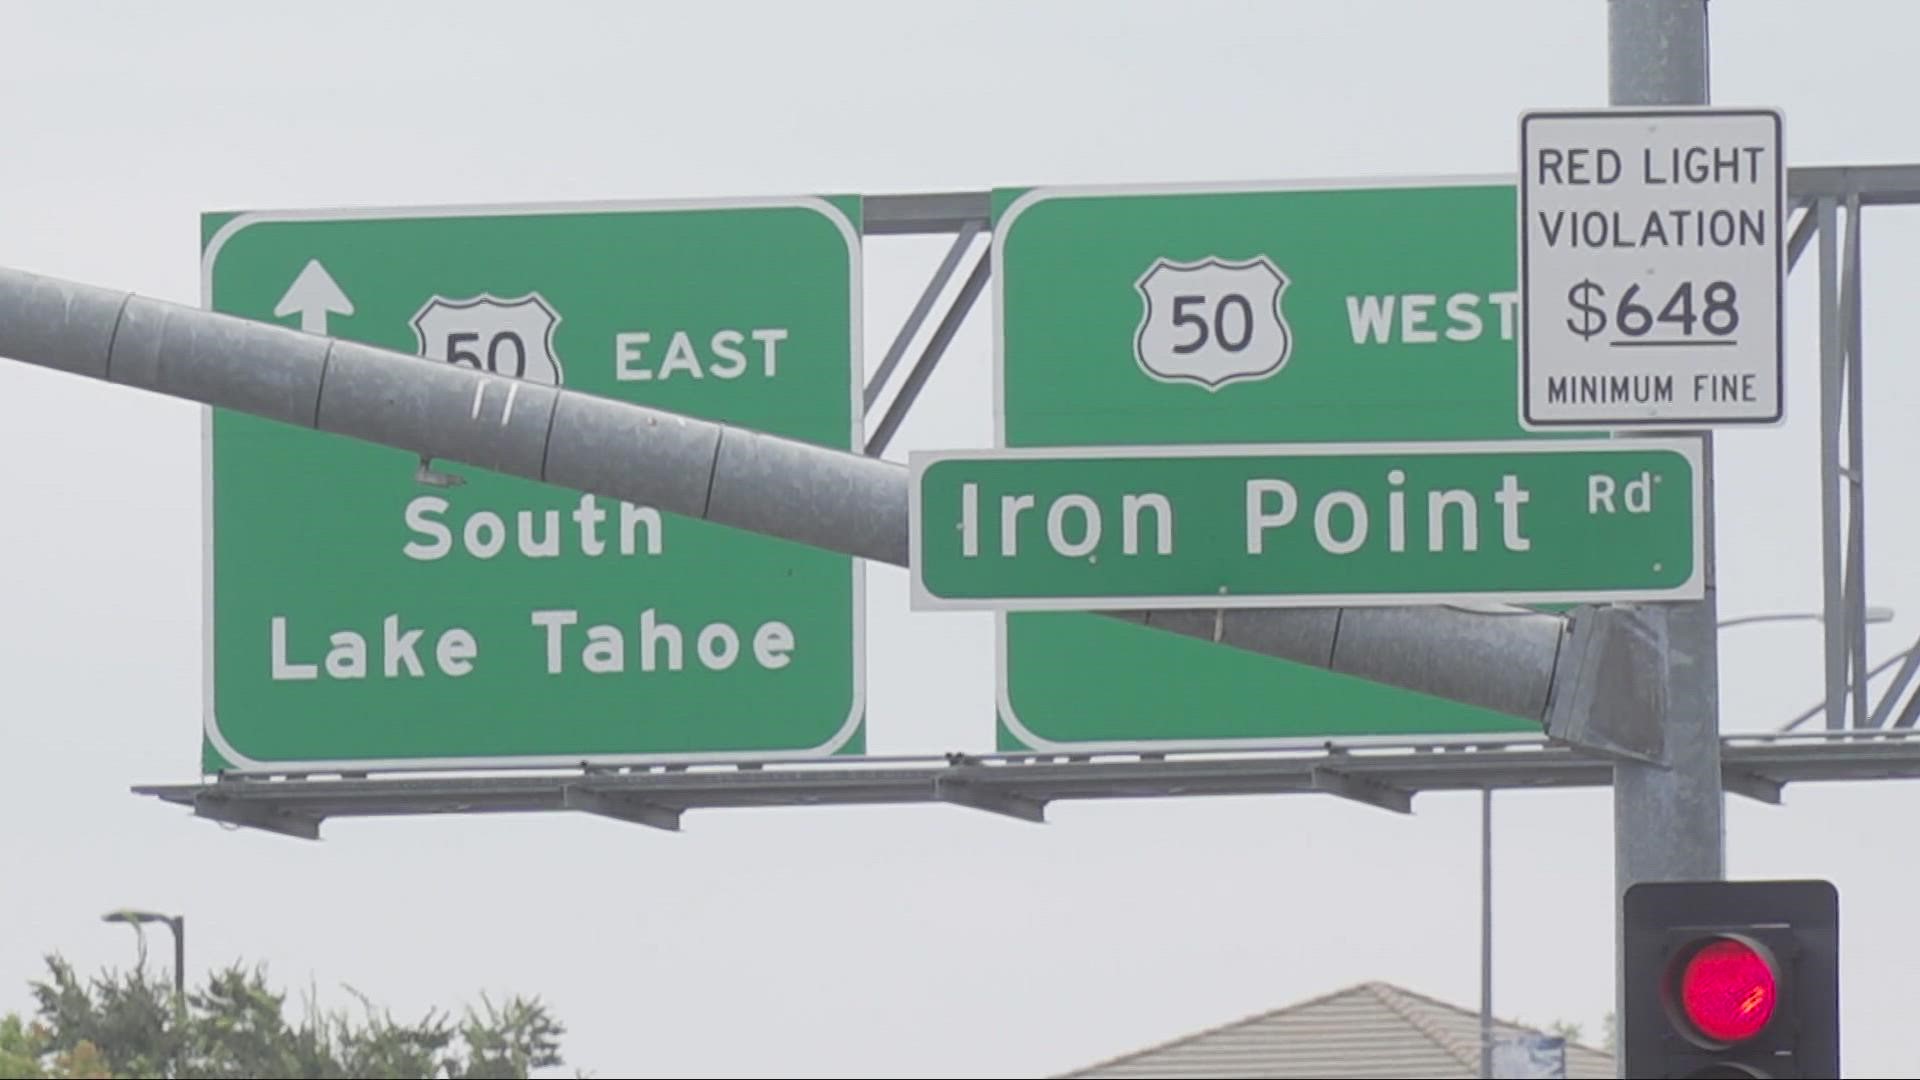 The city of Folsom is working to address traffic concerns. Some residents are concerned about illegal U-Turns at Iron Point Road and East Bidwell Street.